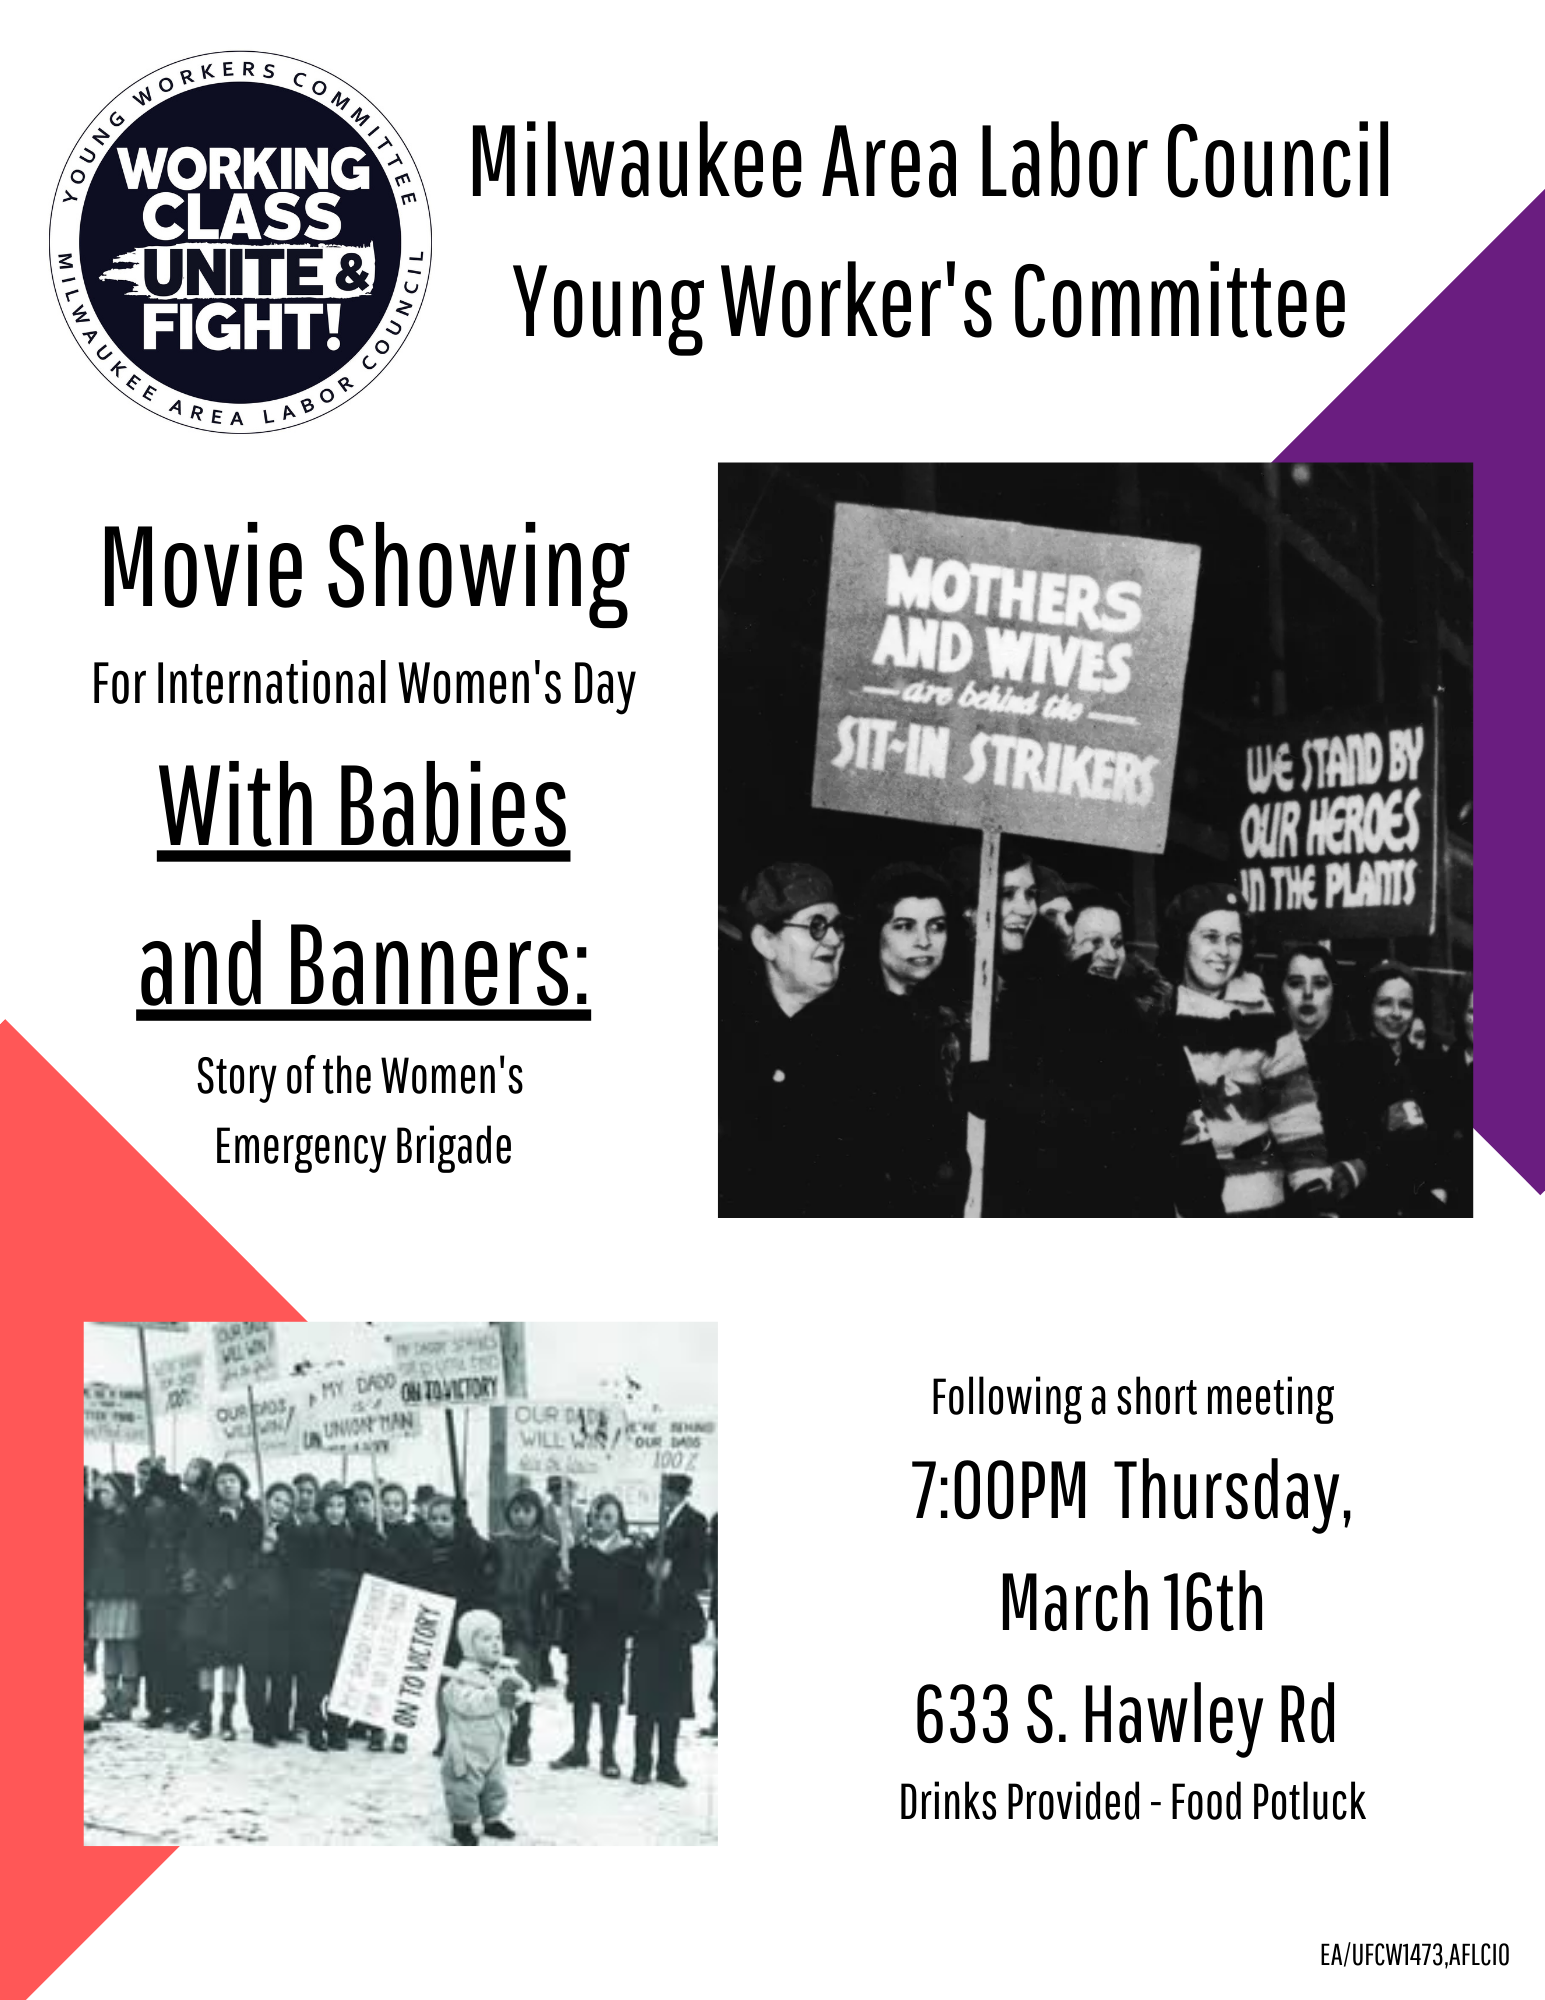 YWC Movie Showing: With Babies and Banners